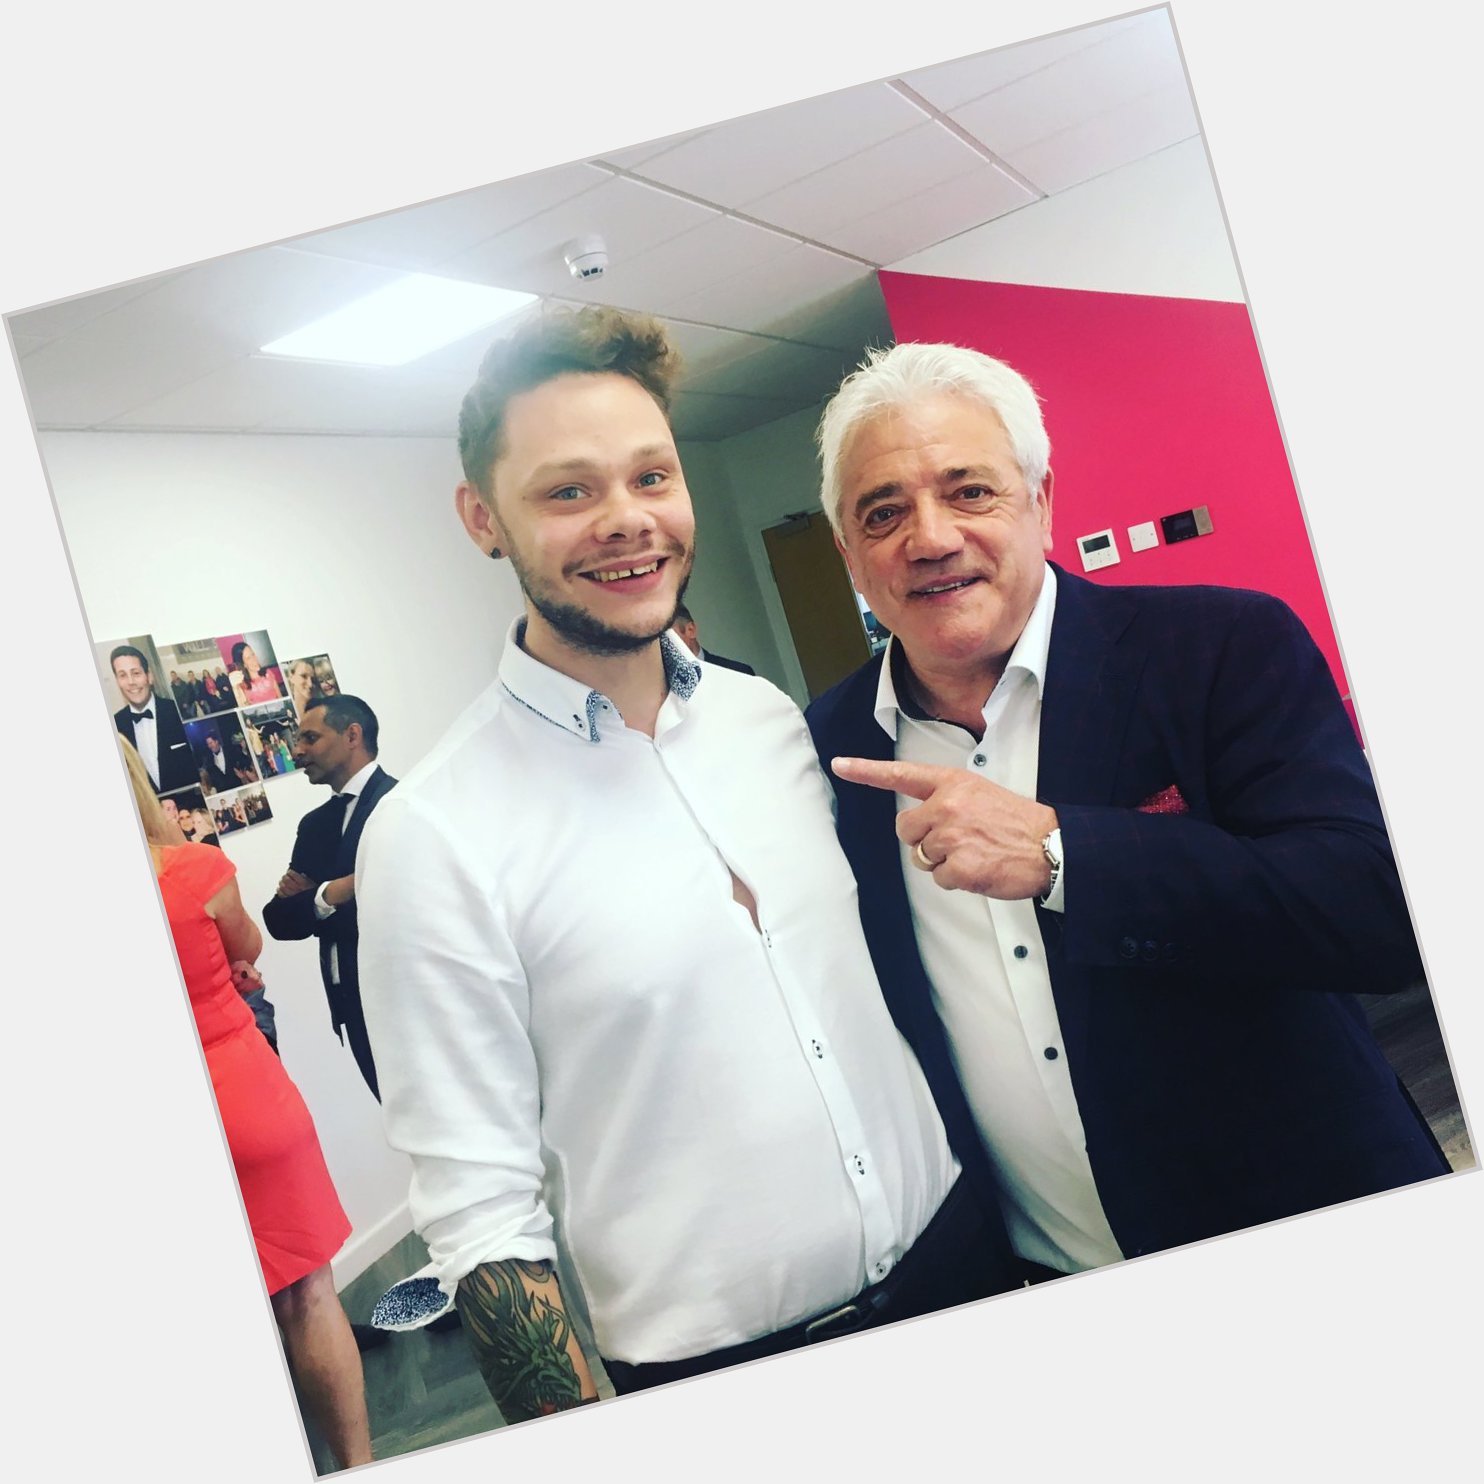 Big happy 70th birthday to Kevin Keegan and big shout out to that time he came to my work for some apparent reason 